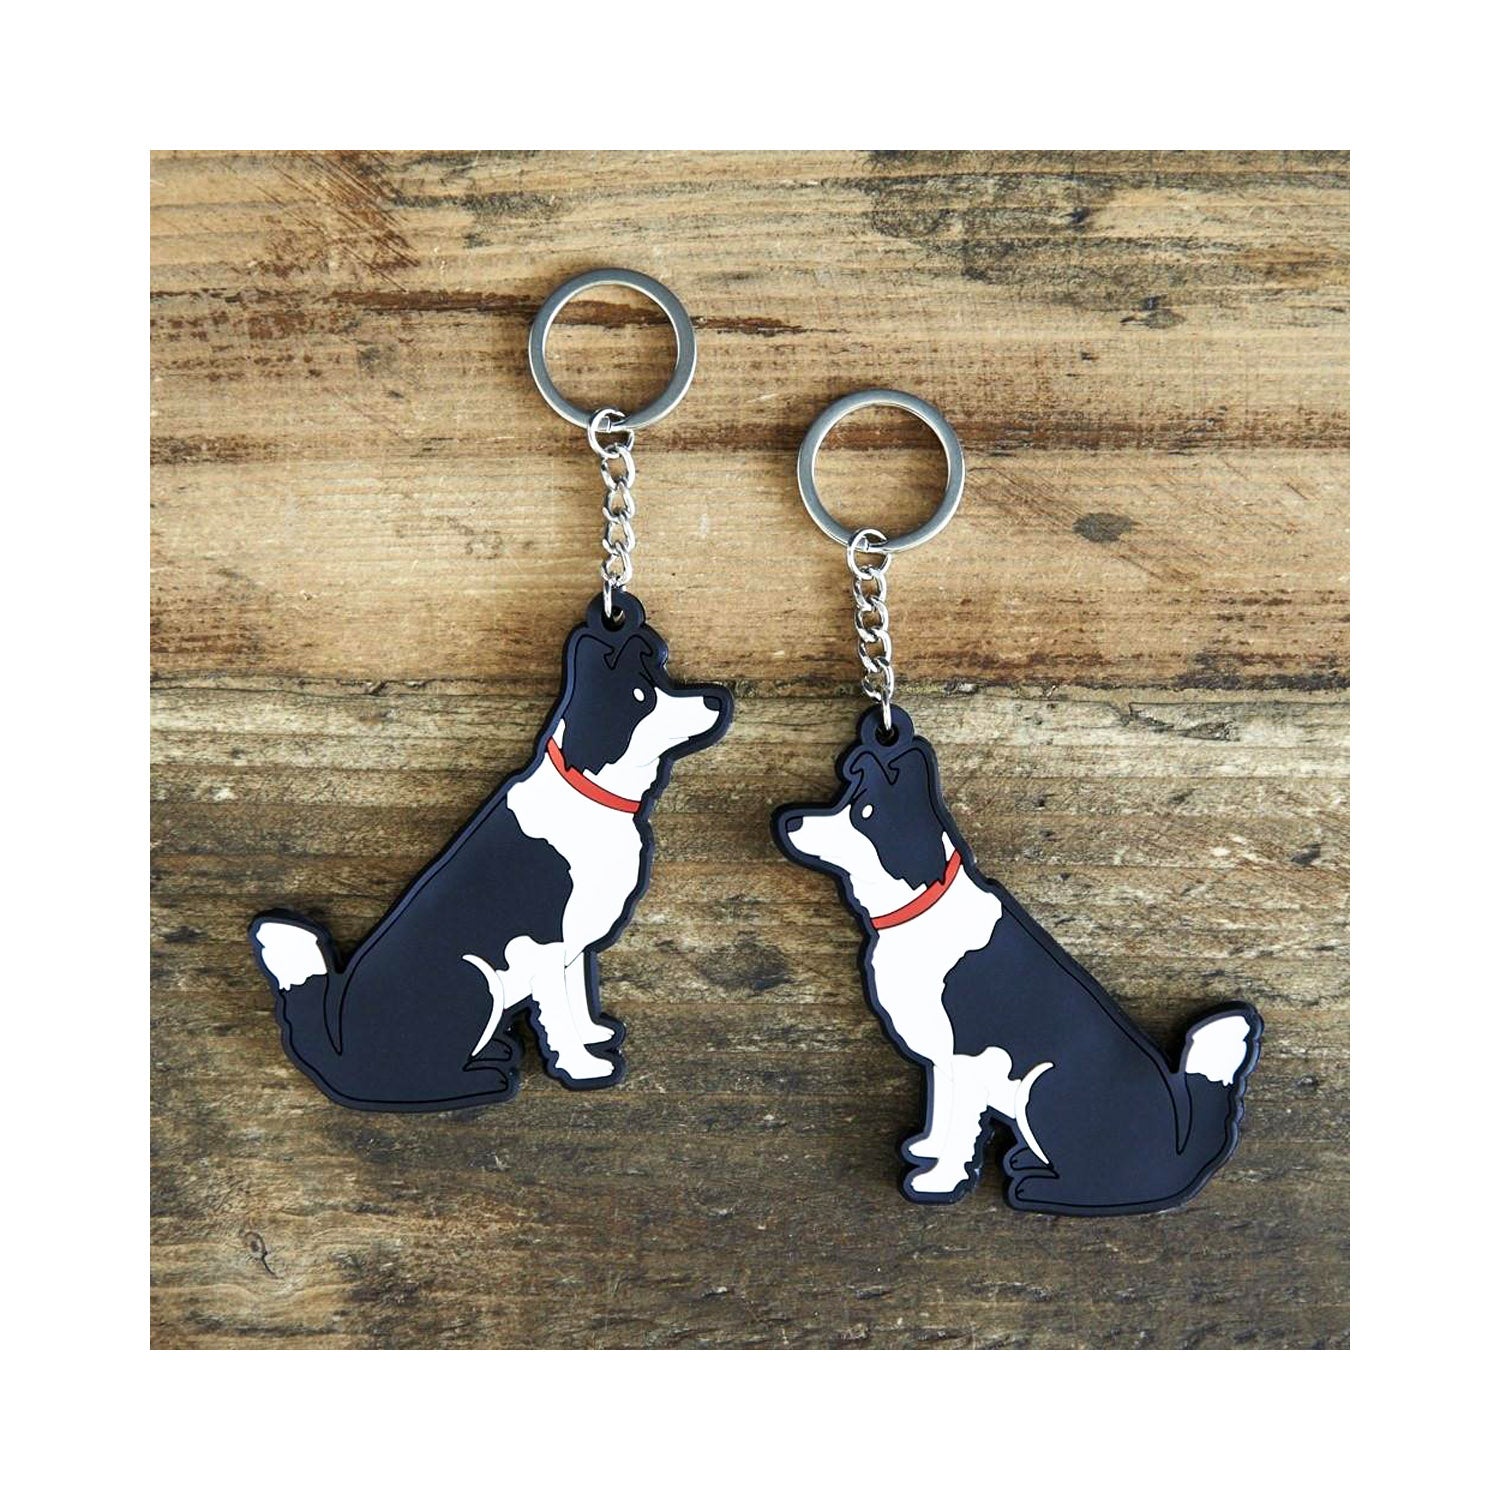 Dog Lover Gifts available at Dog Krazy Gifts - Lola The Border Collie Keyring - part of the Sweet William range available from Dog Krazy Gifts